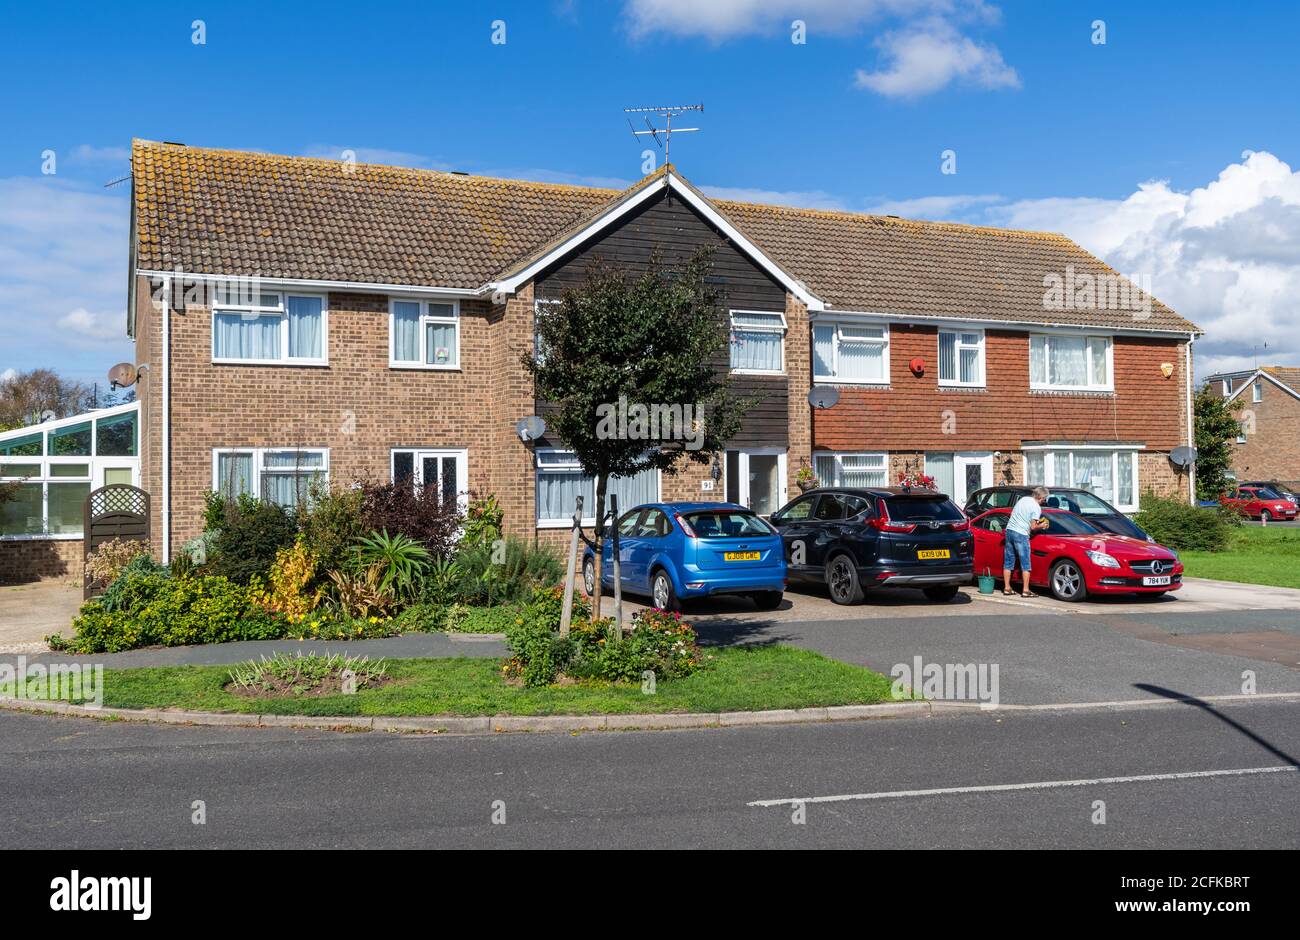 Small modern terrace 2-storey British houses in a small town with cars in driveway (off-road parking) in West Sussex, England, UK. Stock Photo